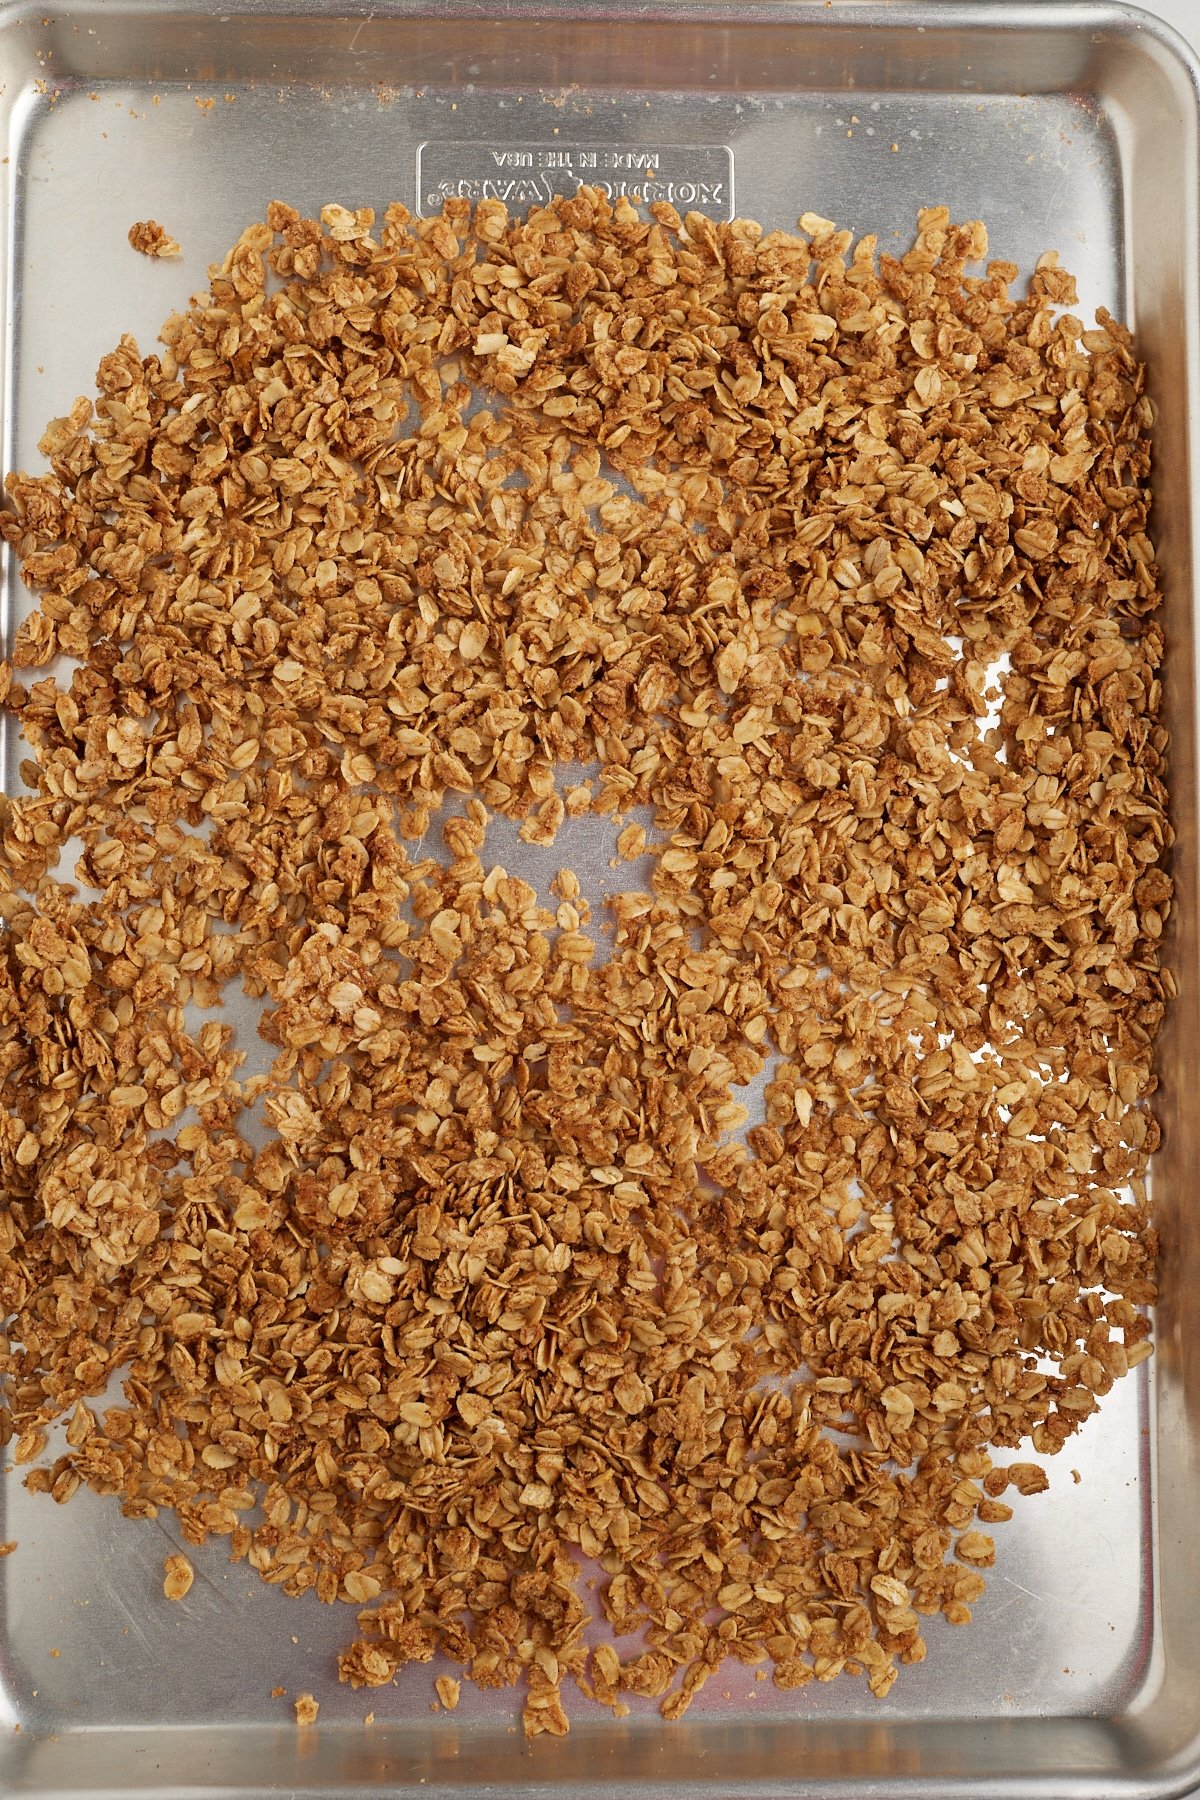 Granola spread out on a baking sheet to cool.